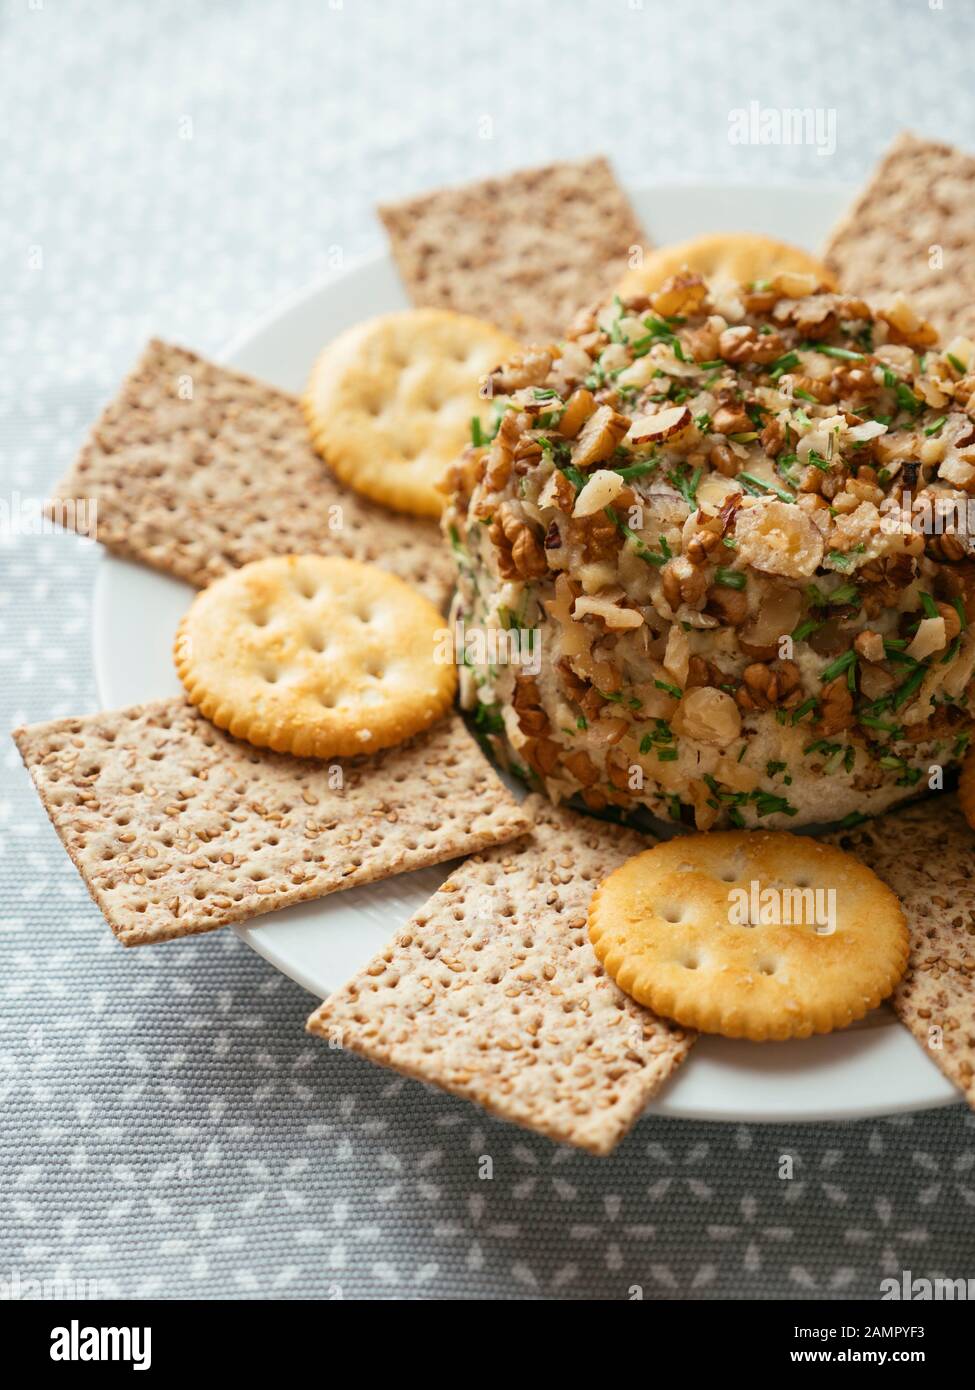 Home made vegan cheddar with nuts, served with crackers. Stock Photo